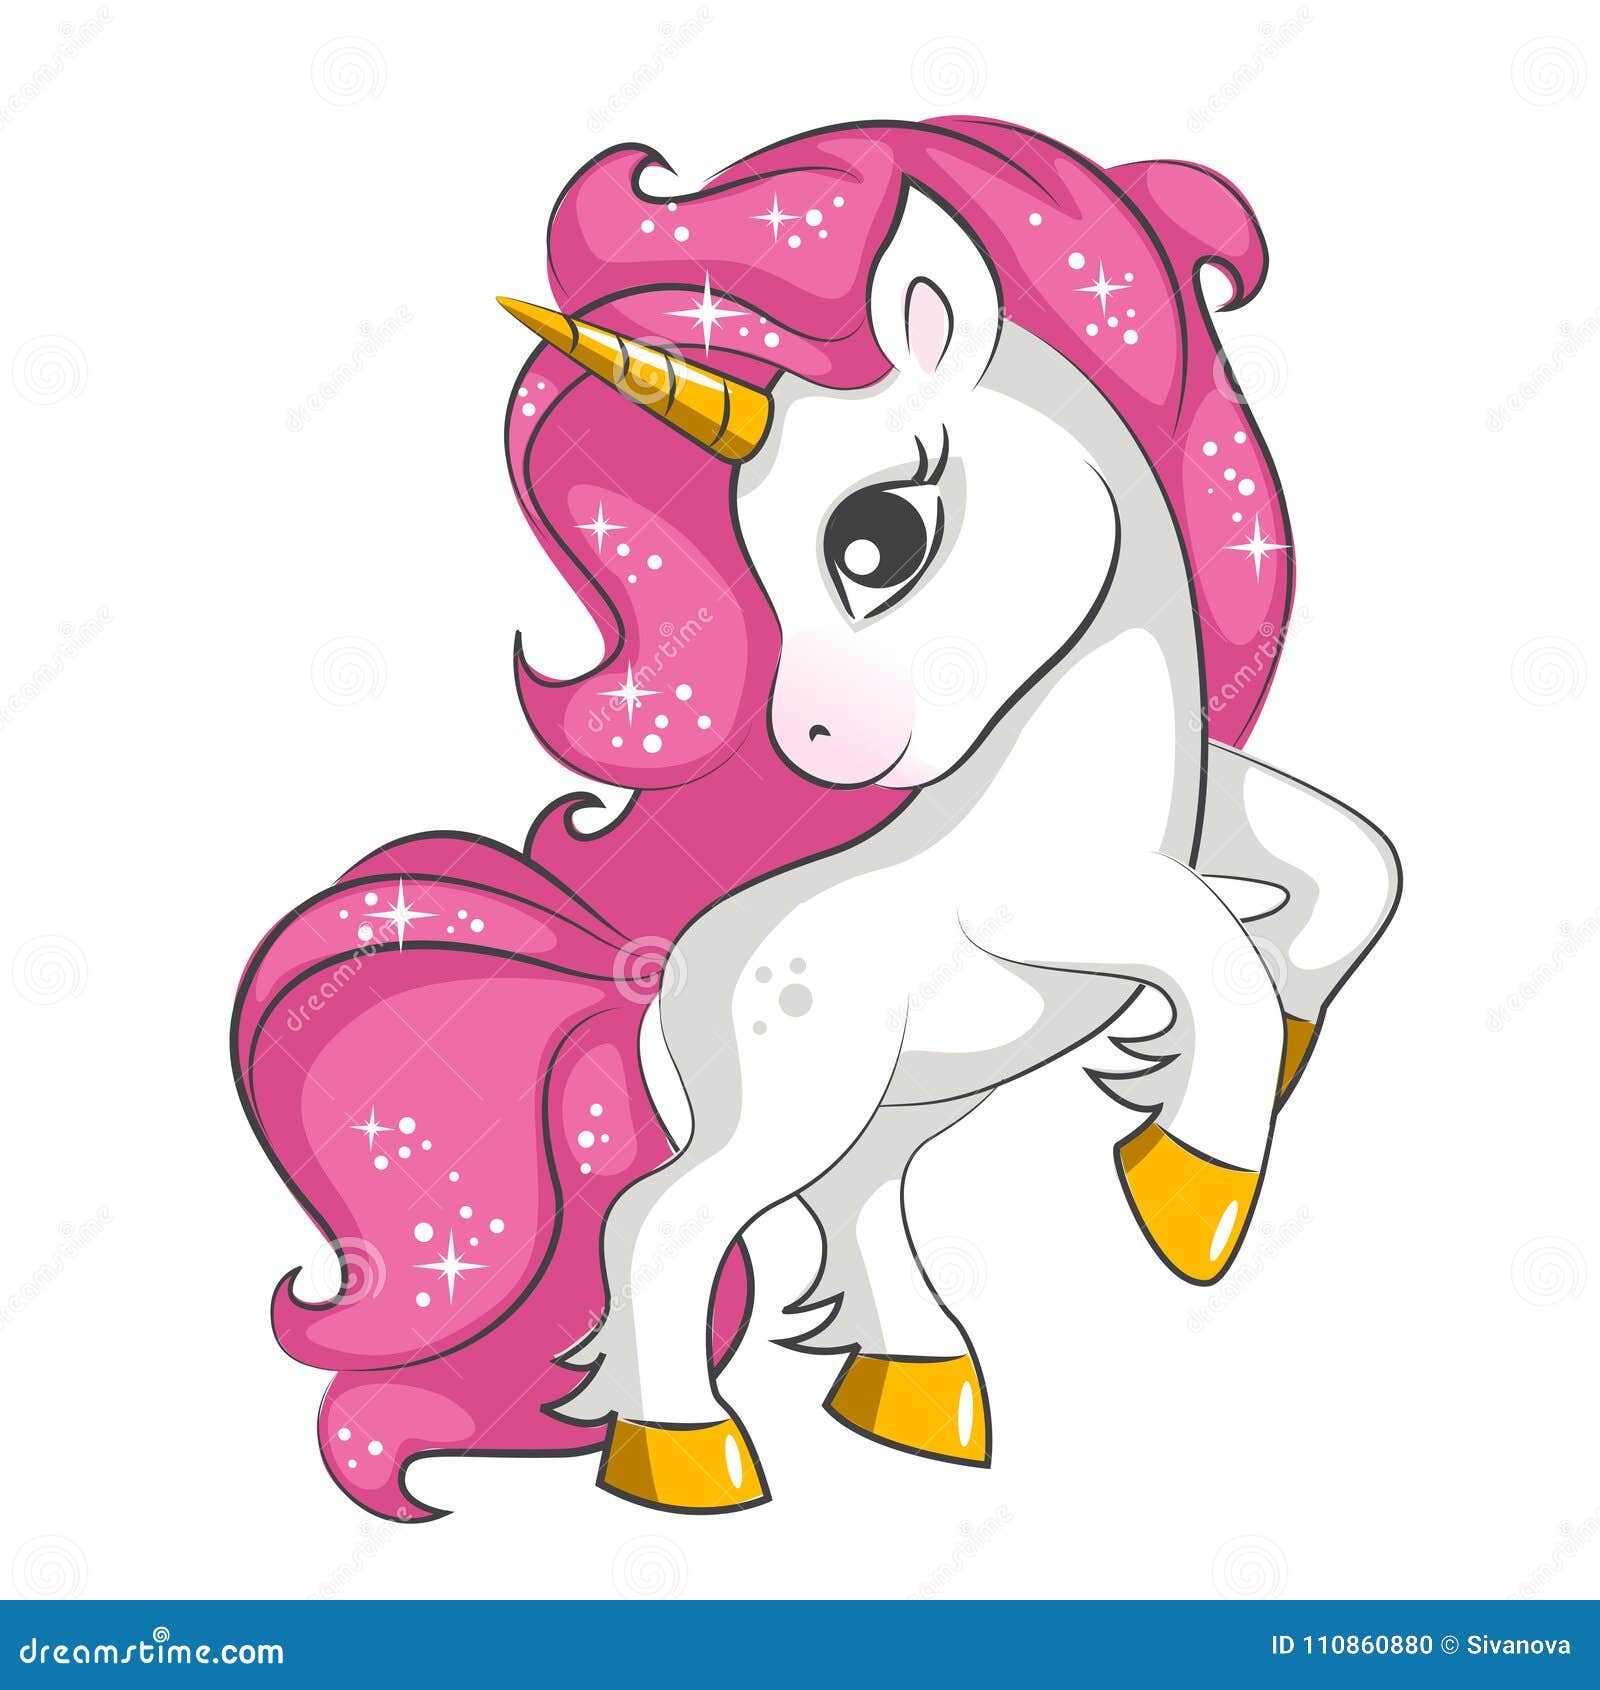 Pink Unicorn With Rainbow Colors. Royalty-Free Stock Photography ...